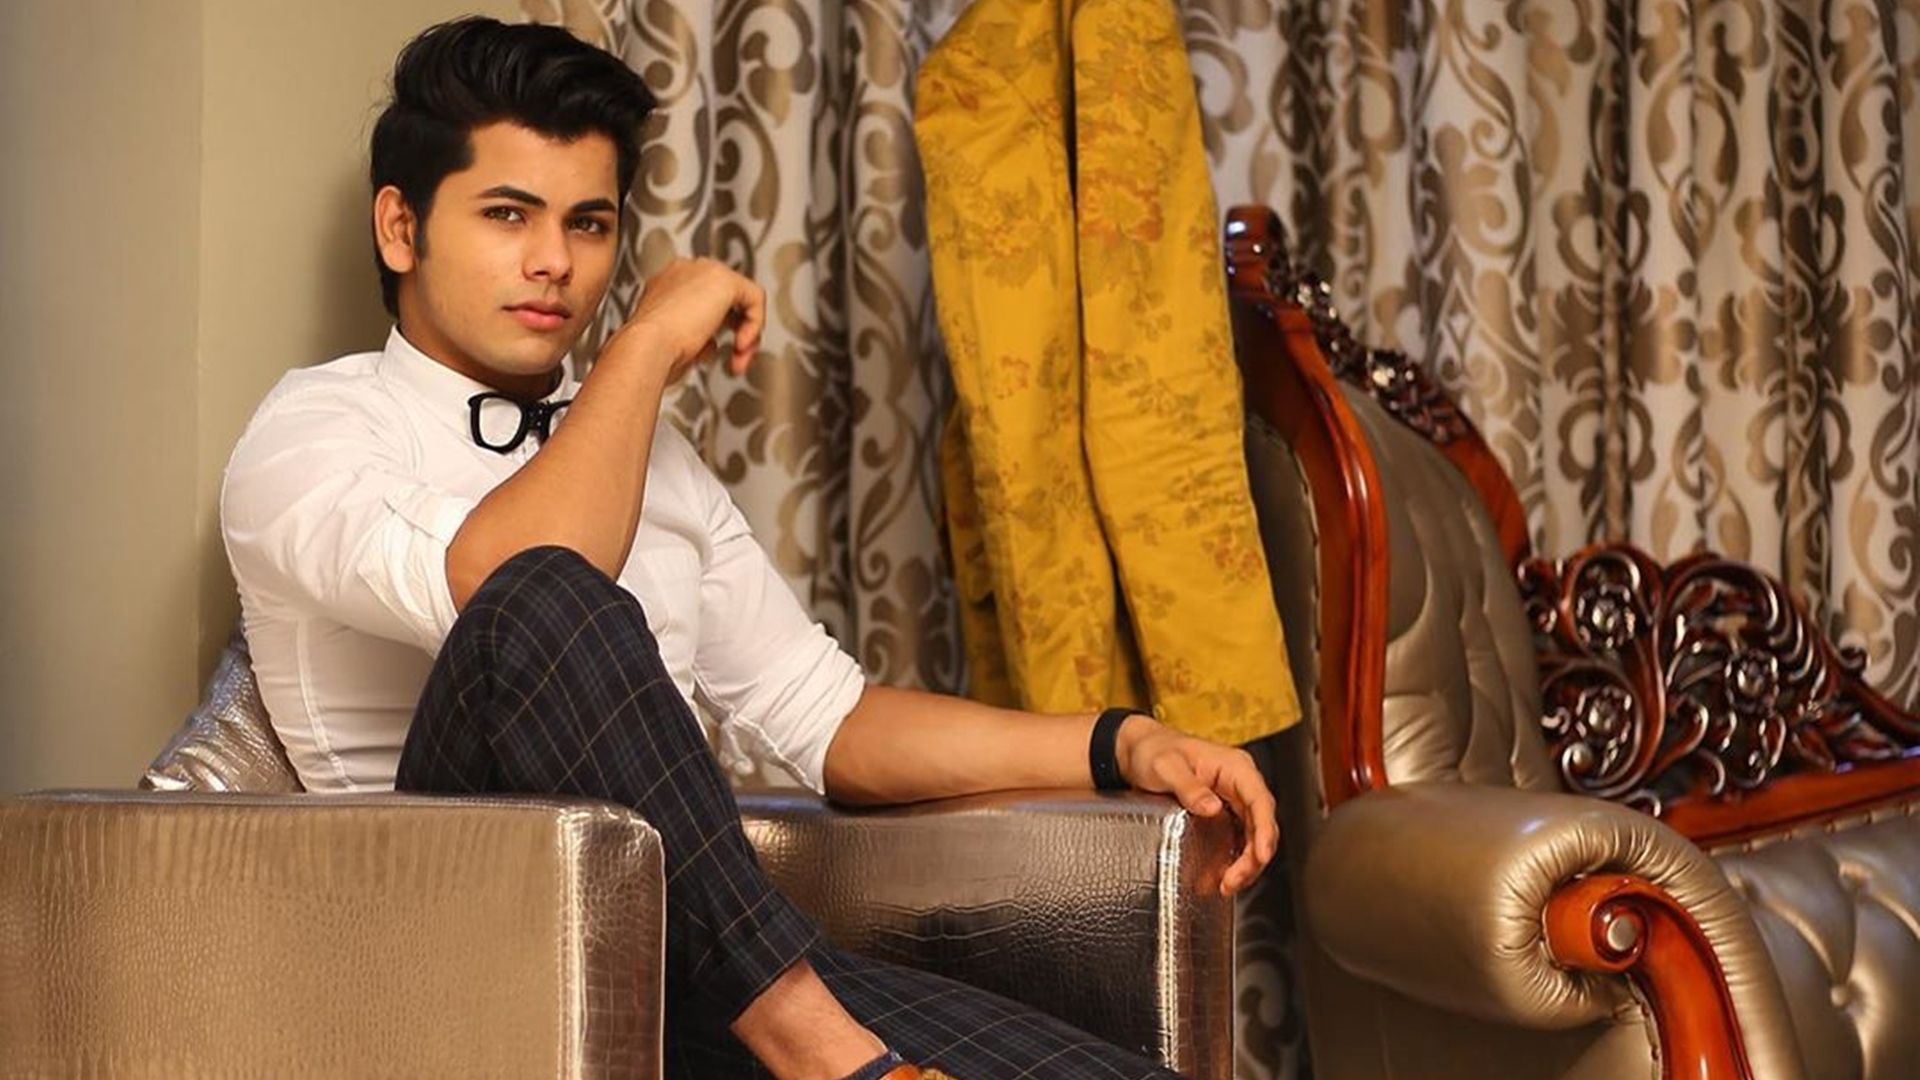 Siddharth Nigam Wallpapers - Wallpaper Cave